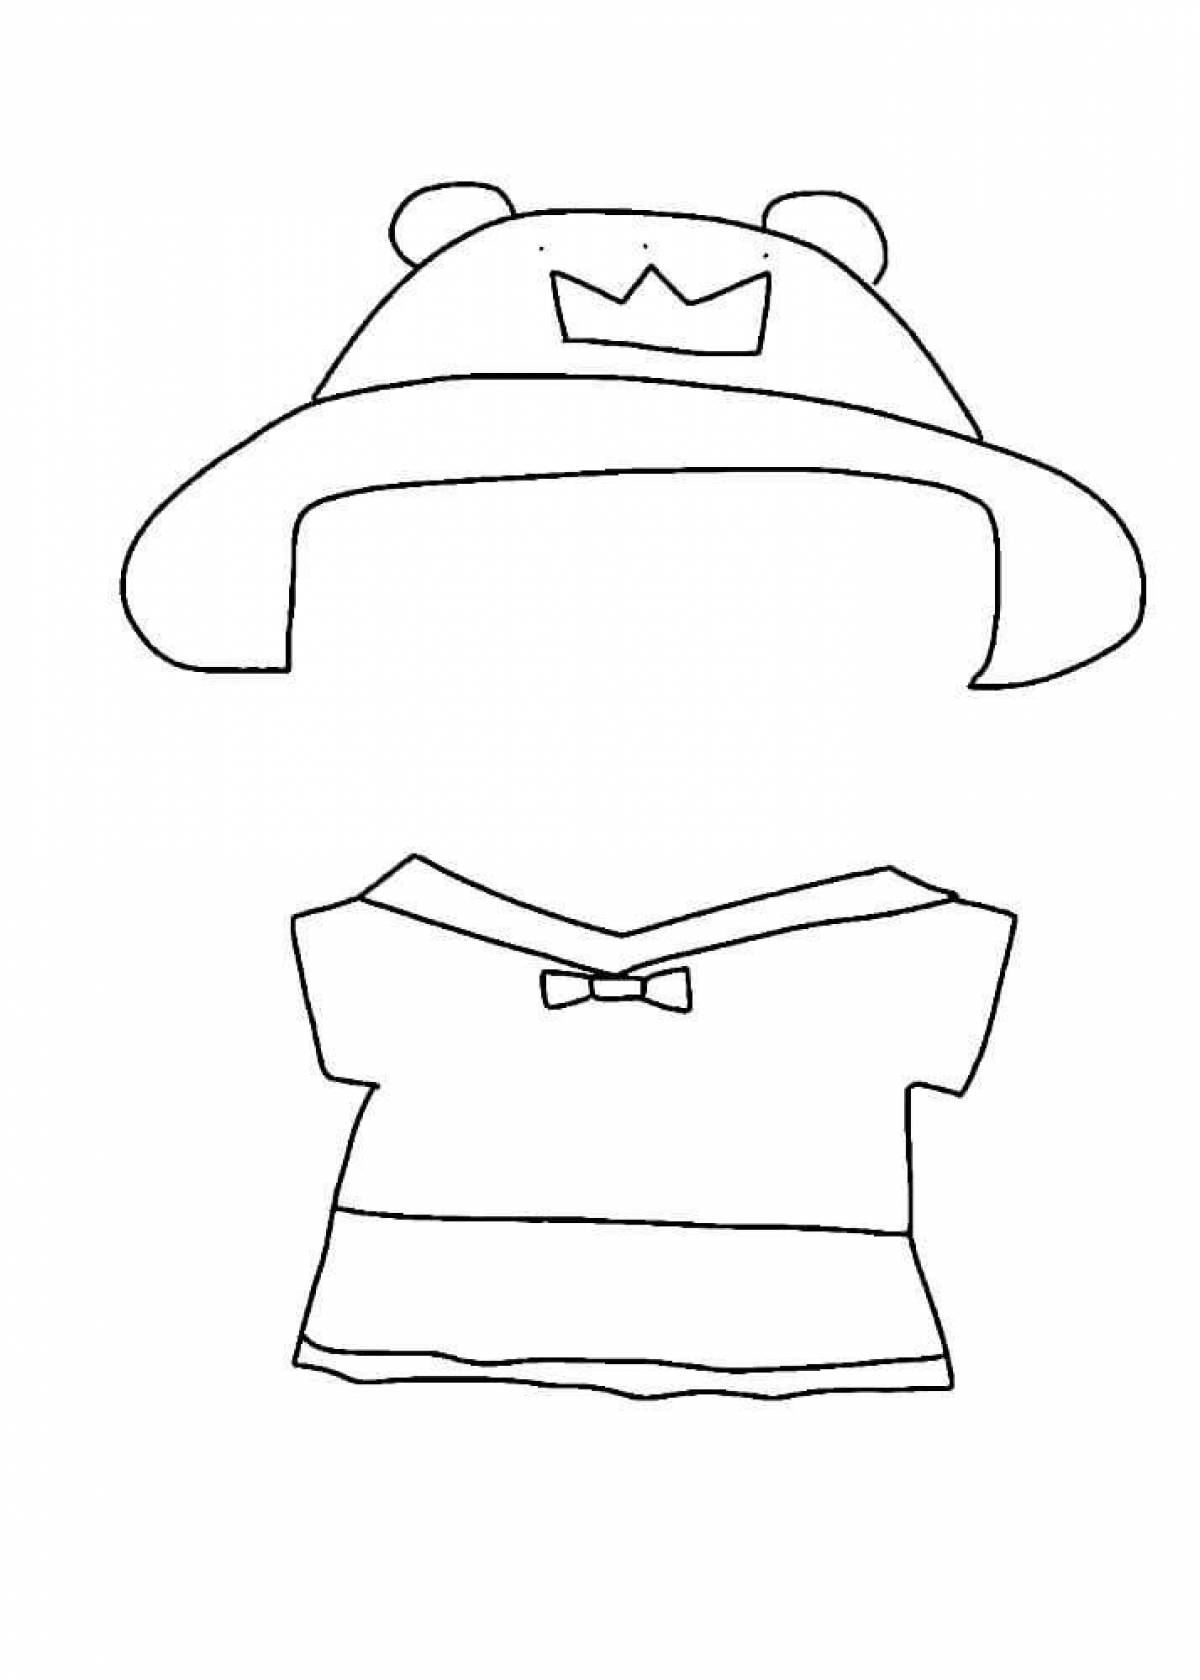 Lalaphan duck with clothes #5